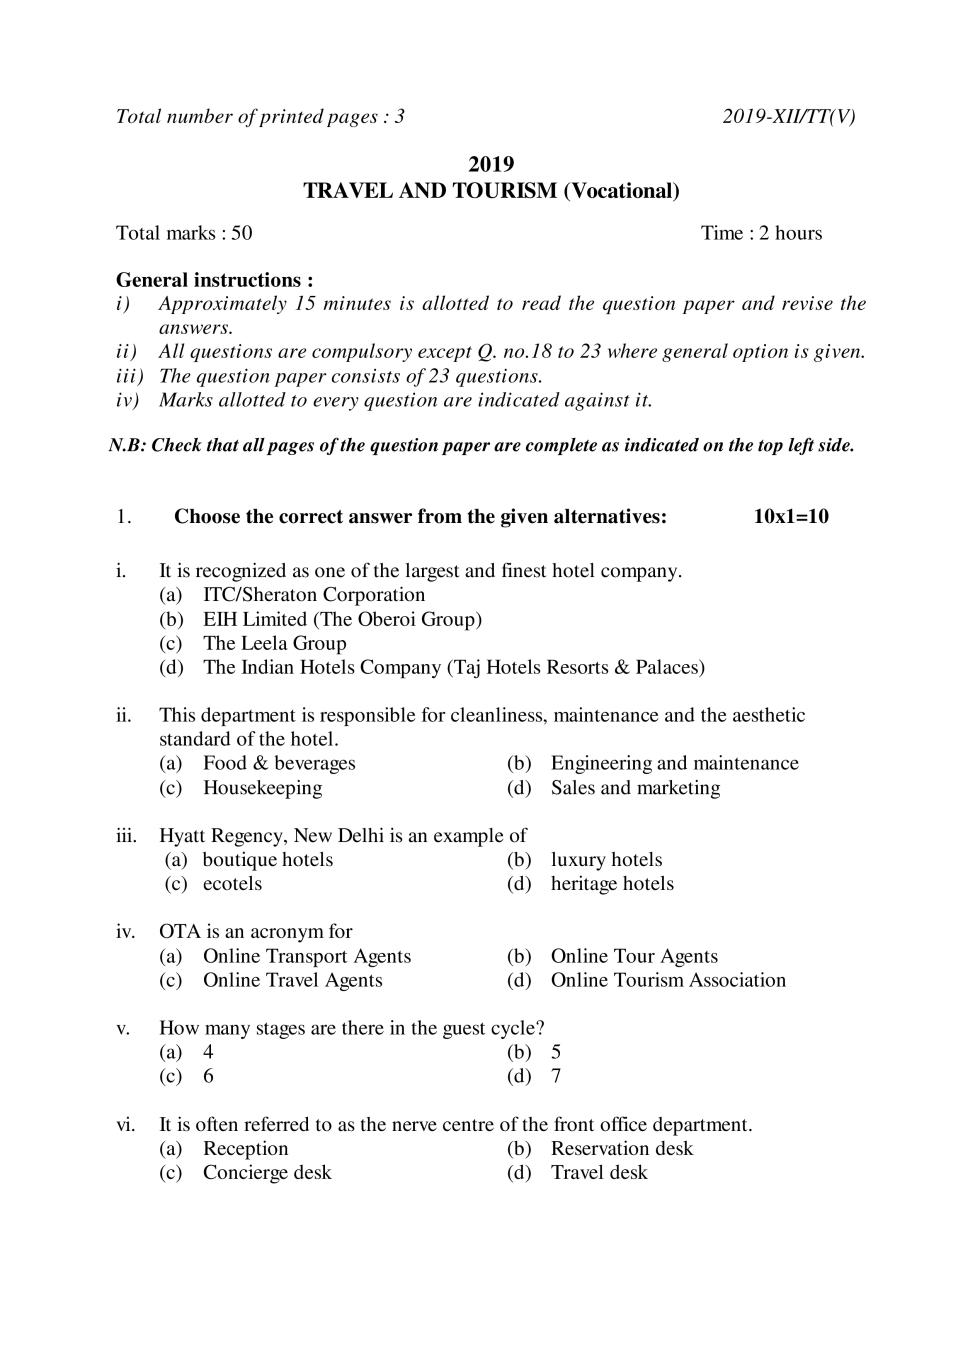 NBSE Class 12 Question Paper 2019 for Fund of Travel and Tourism - Page 1